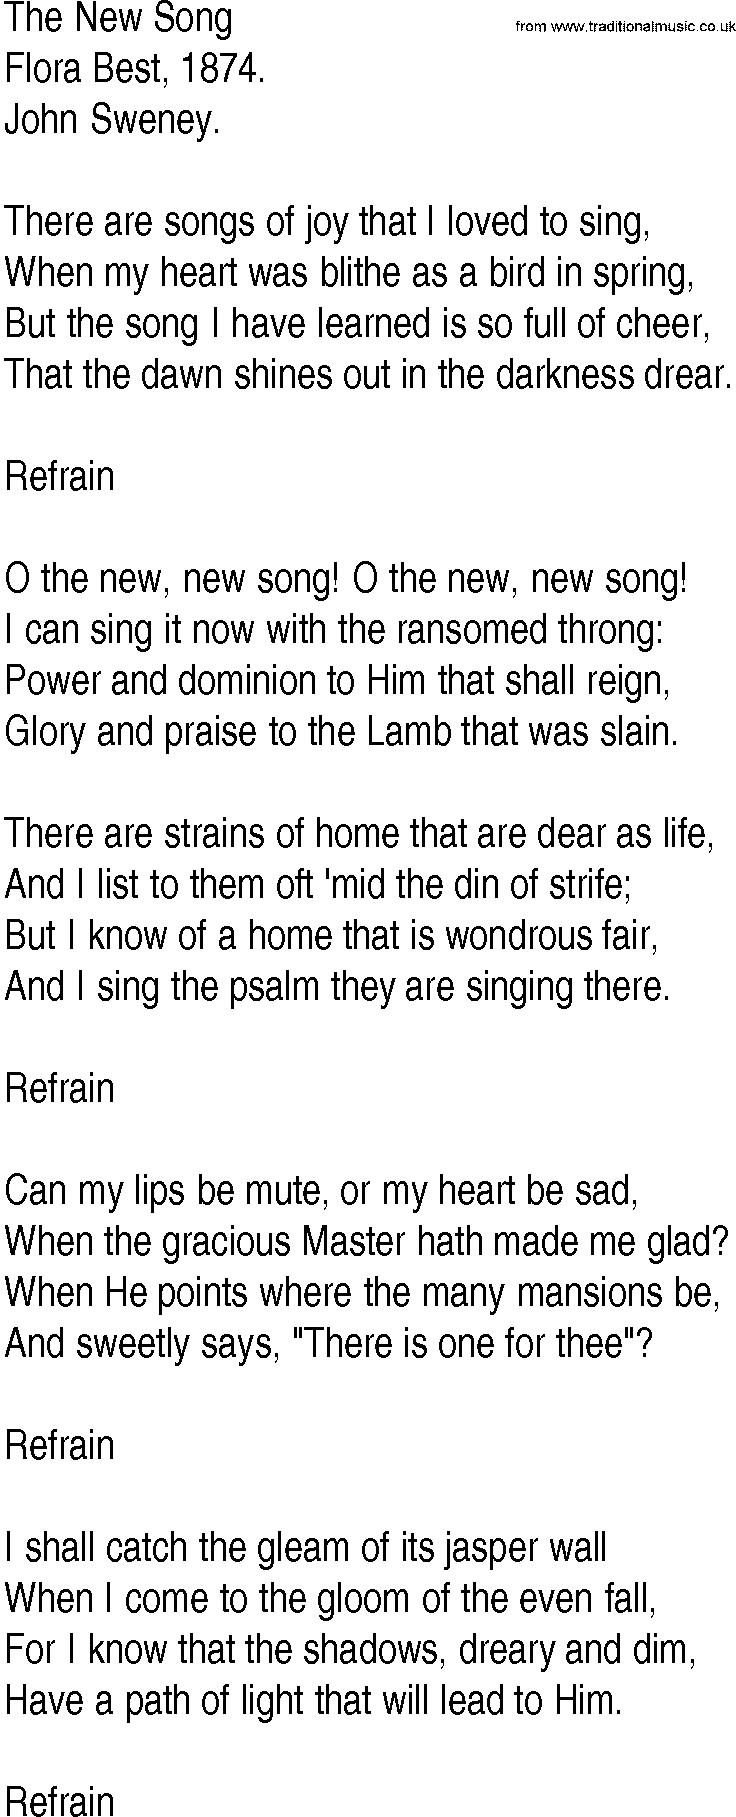 Hymn and Gospel Song: The New Song by Flora Best lyrics